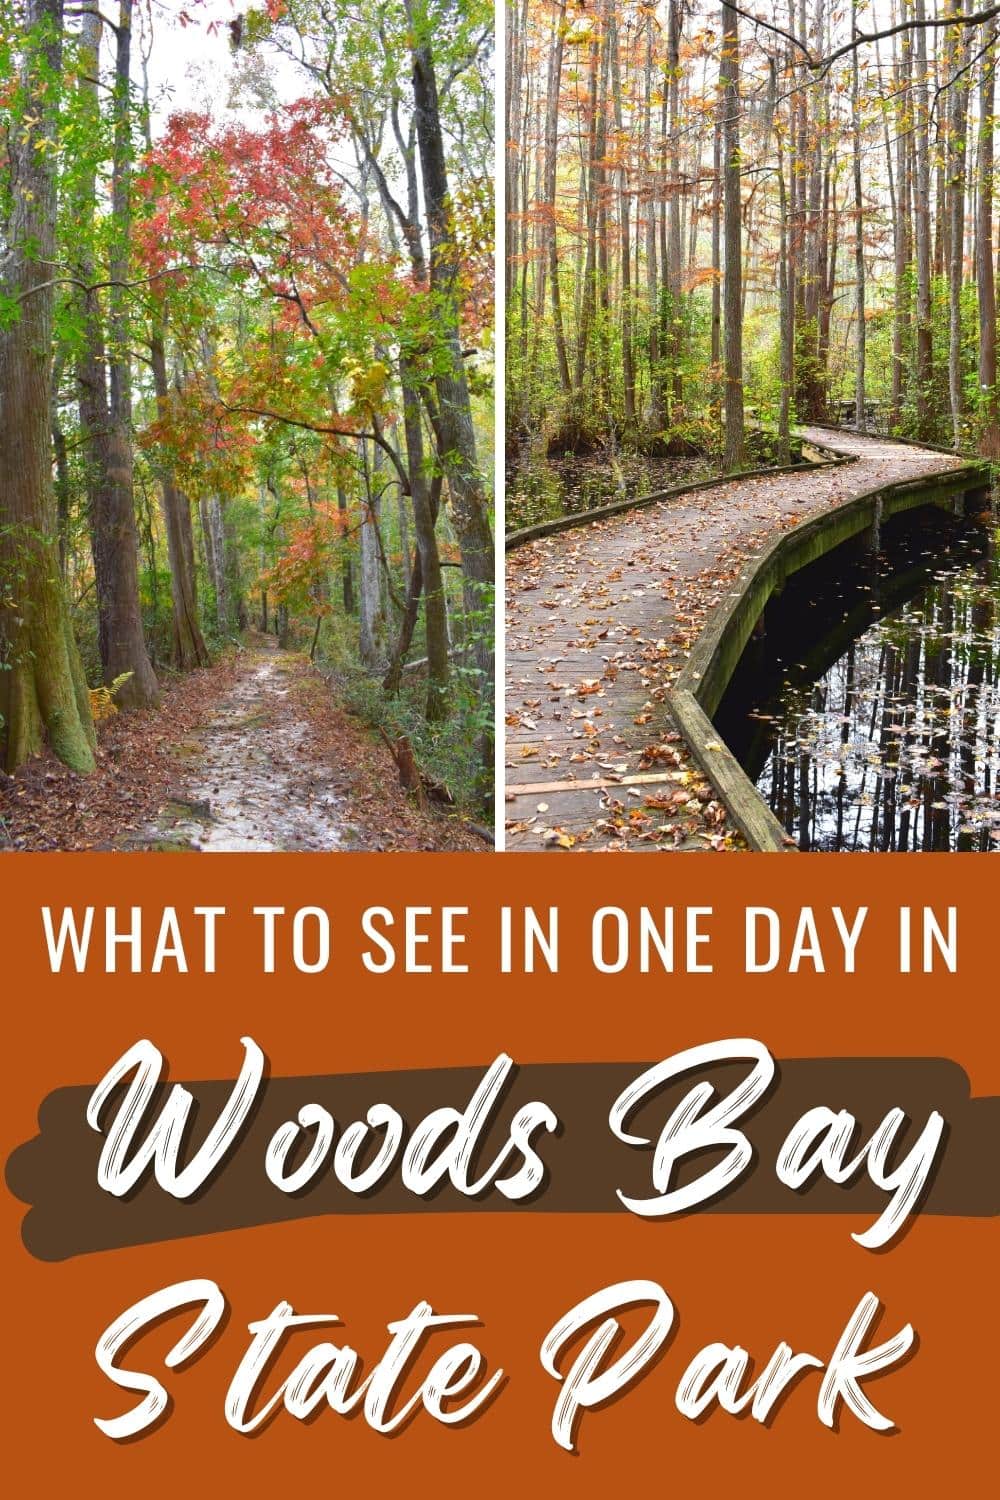 A Peaceful Adventure at Woods Bay State Park